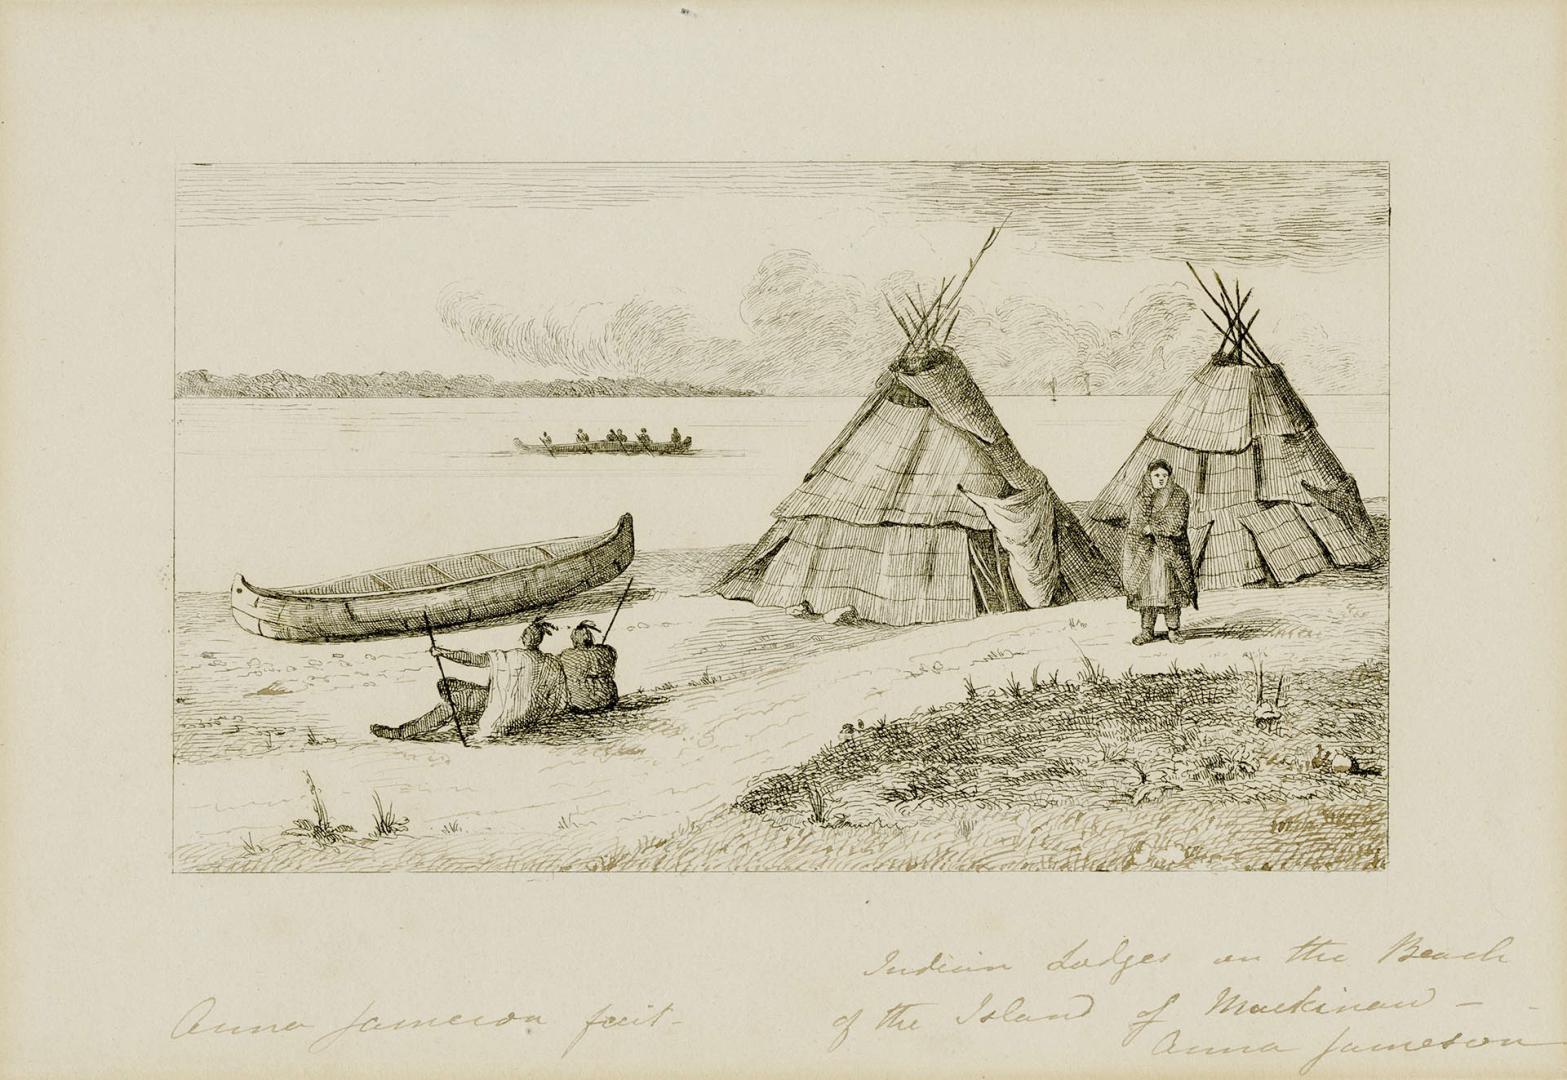 Indian Lodges on the Beach of the Island of Mackinac